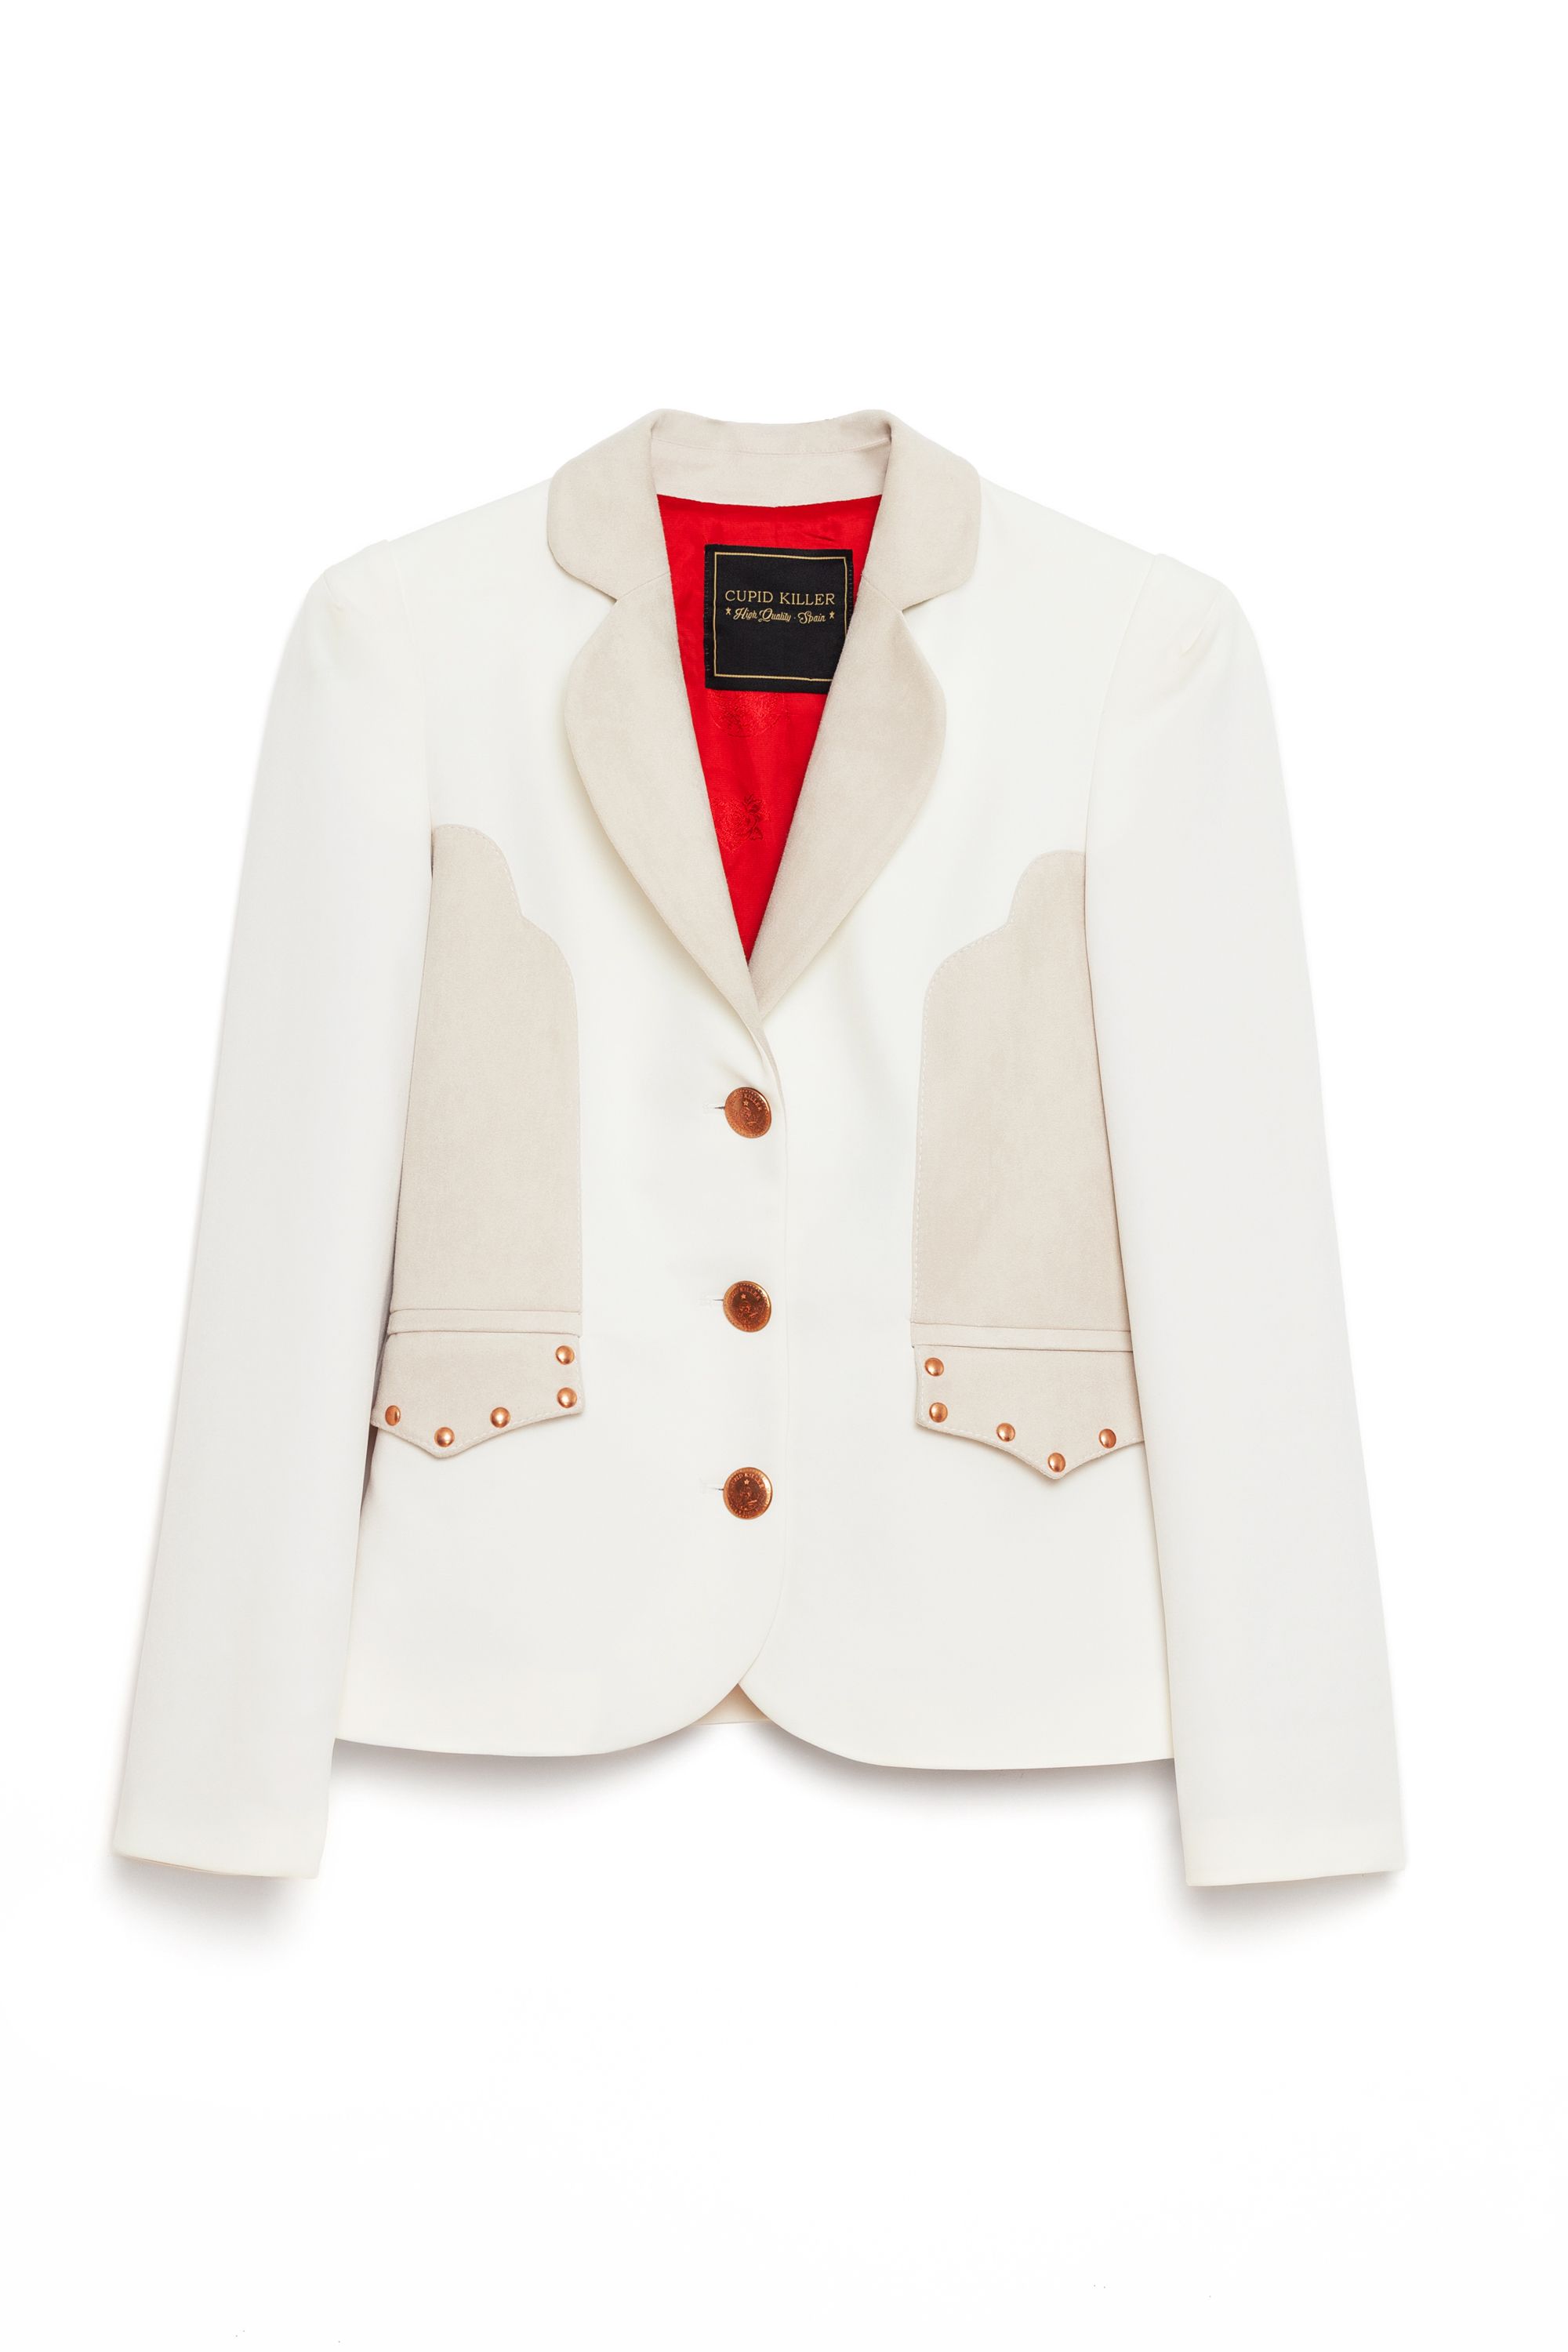 Cowboy style blazer combined with contrast suedette, personalized buttons and back yoke.